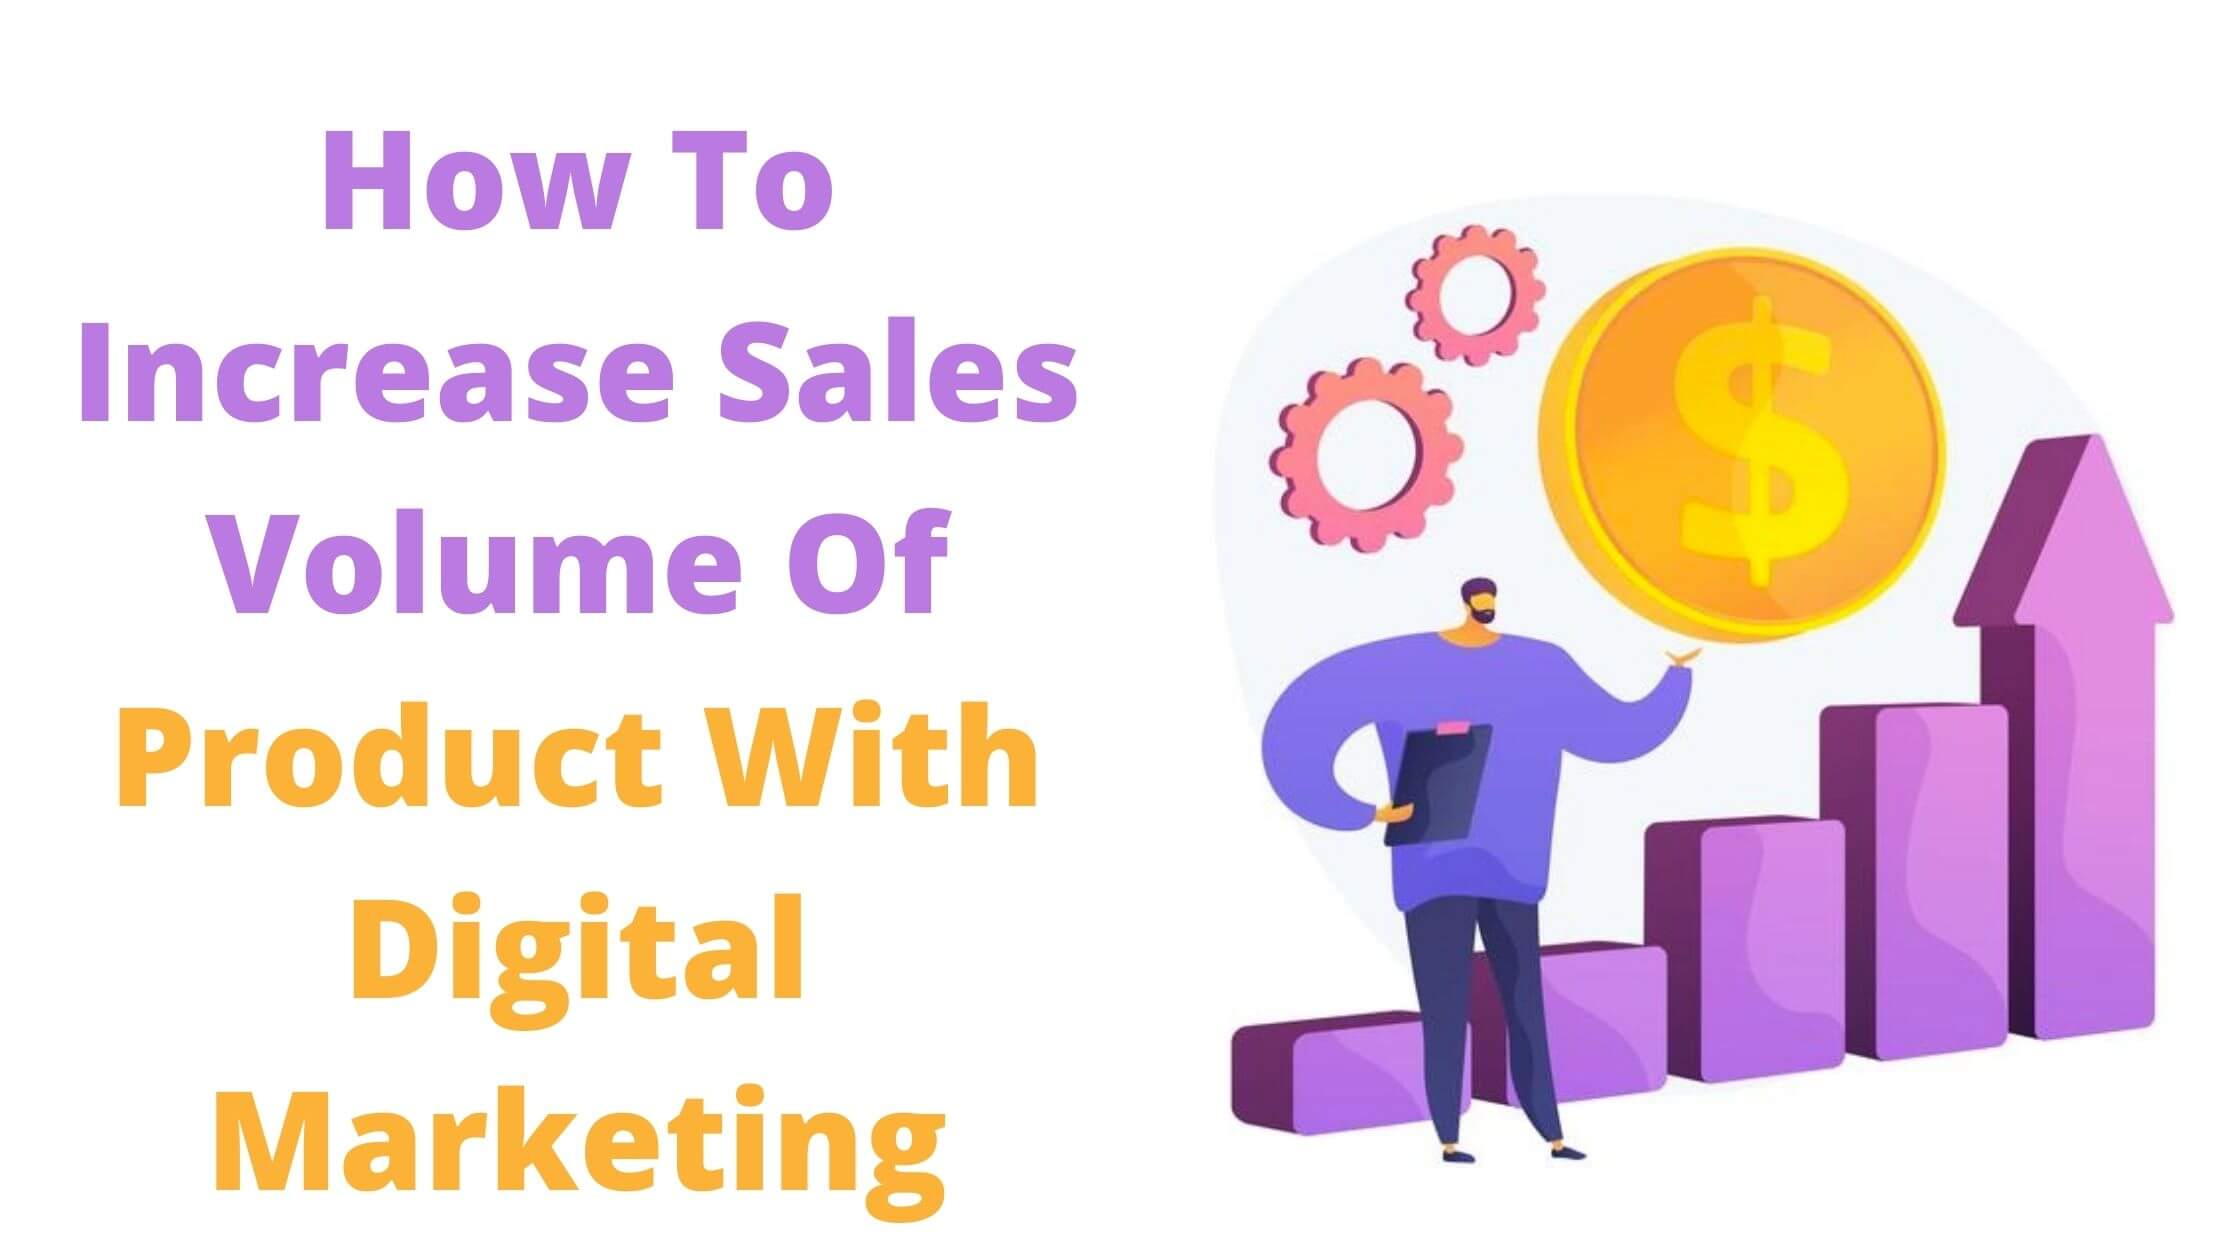 How To Increase Sales Volume Of Product With Digital Marketing